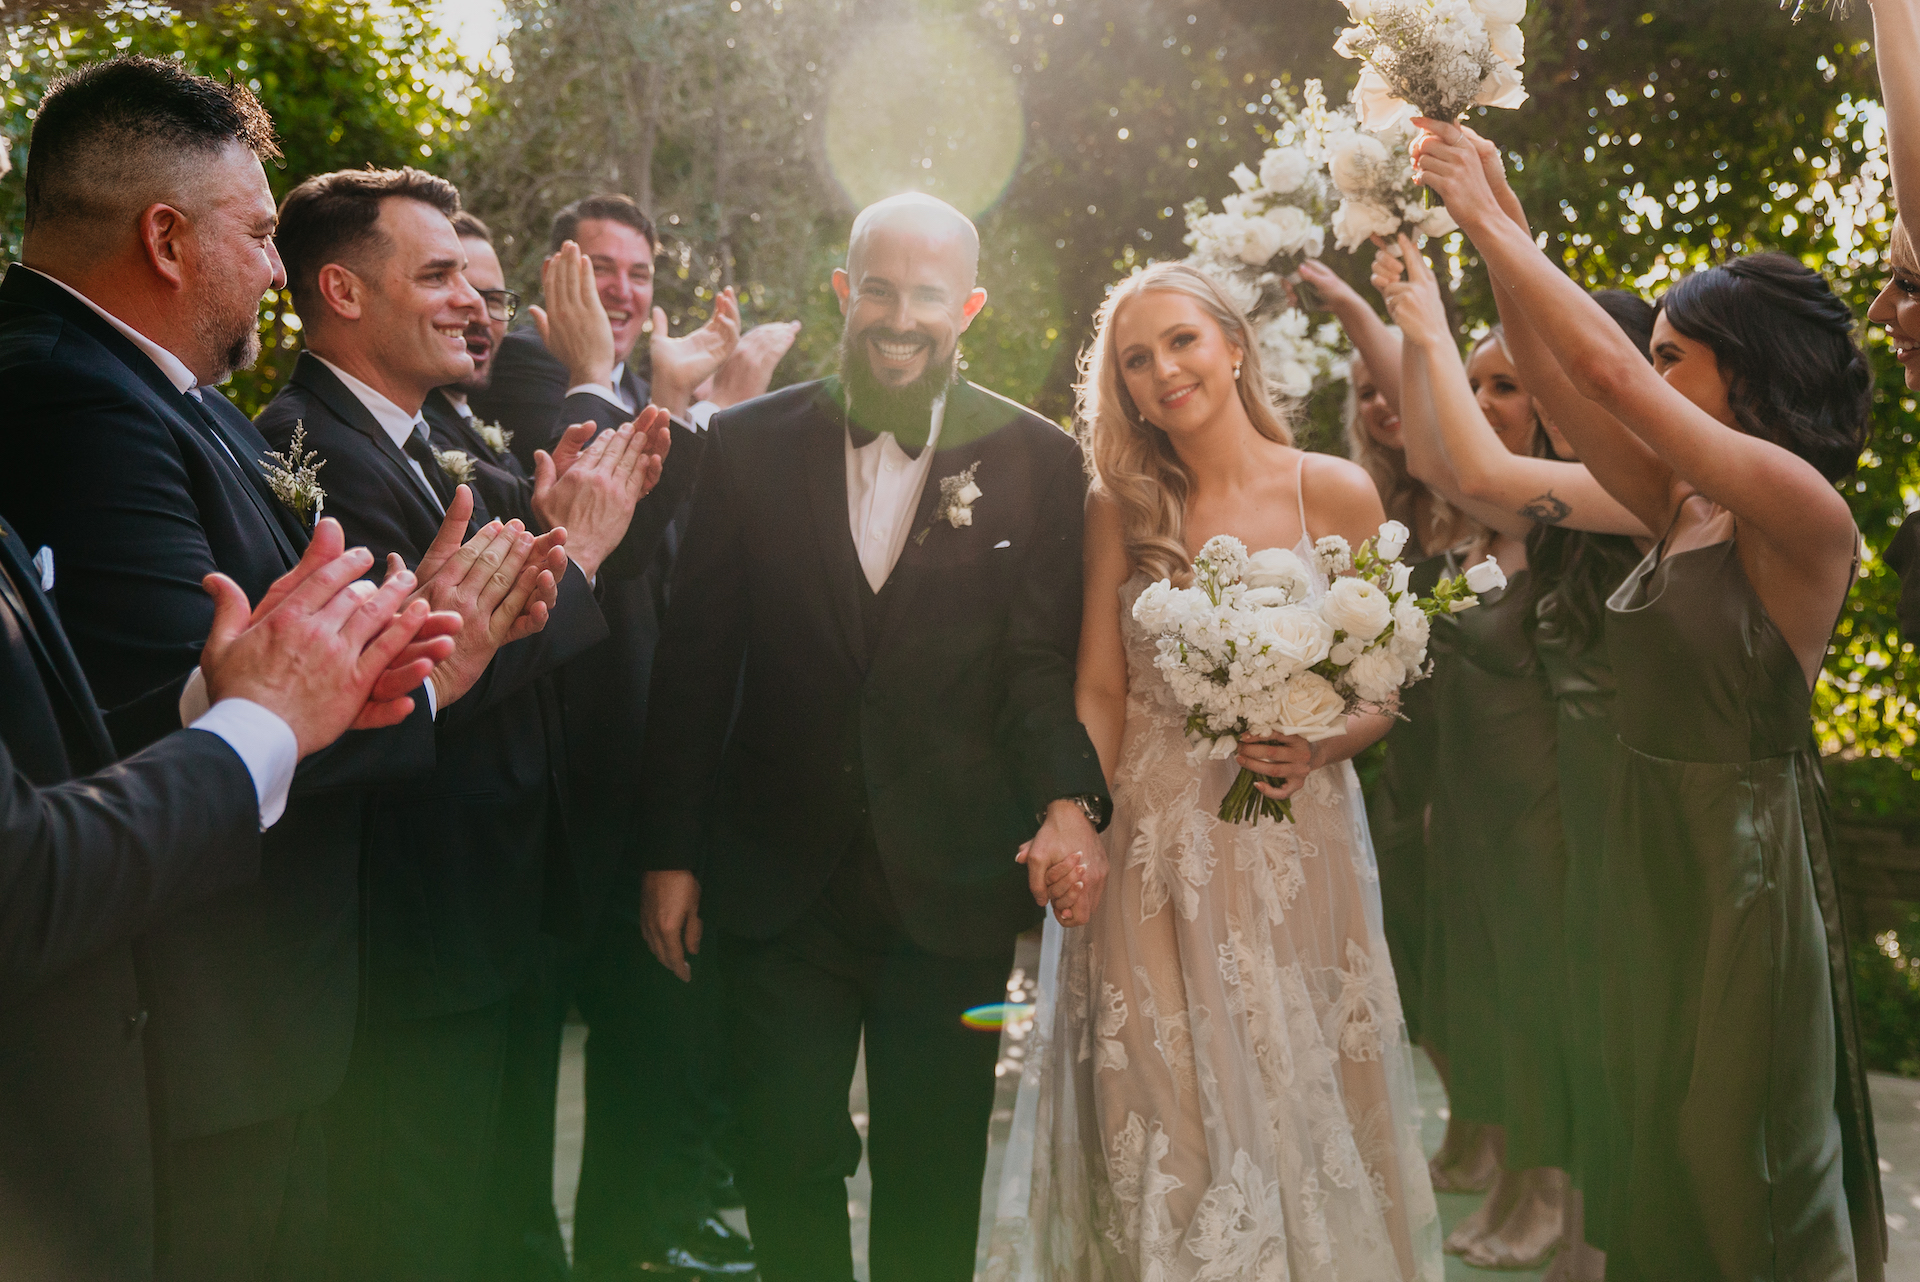 Bride and groom holding hands, smiling, walking between groomsmen and bridesmaids lining the sides and clapping.